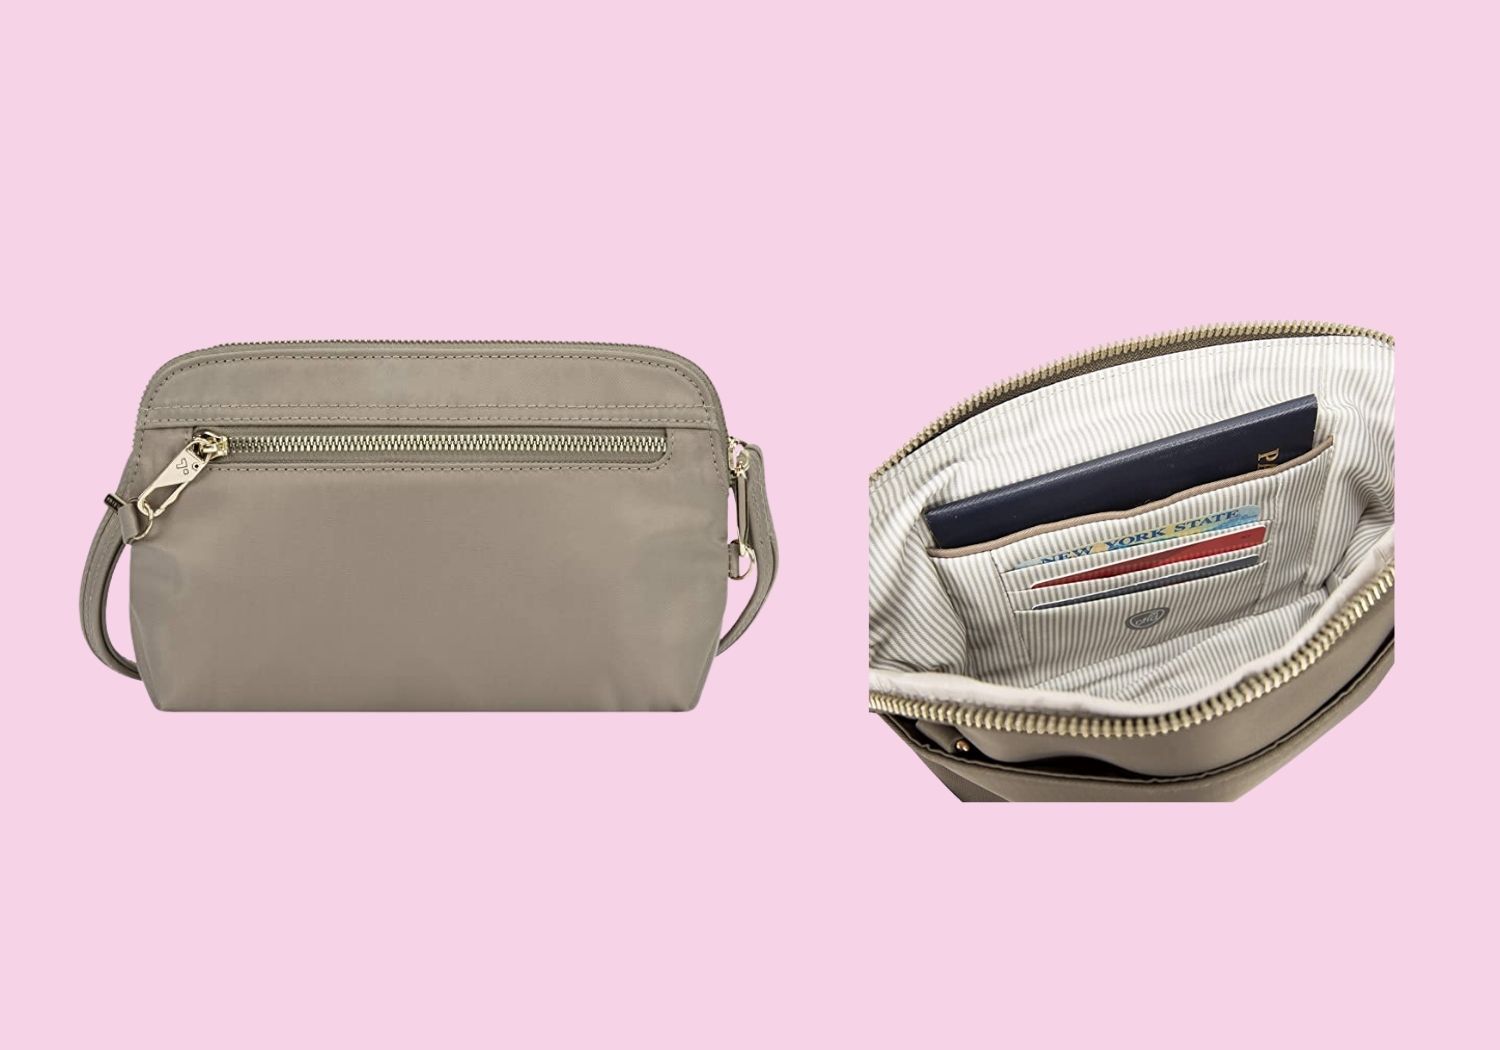 Best anti theft bags - Solo Female Travelers